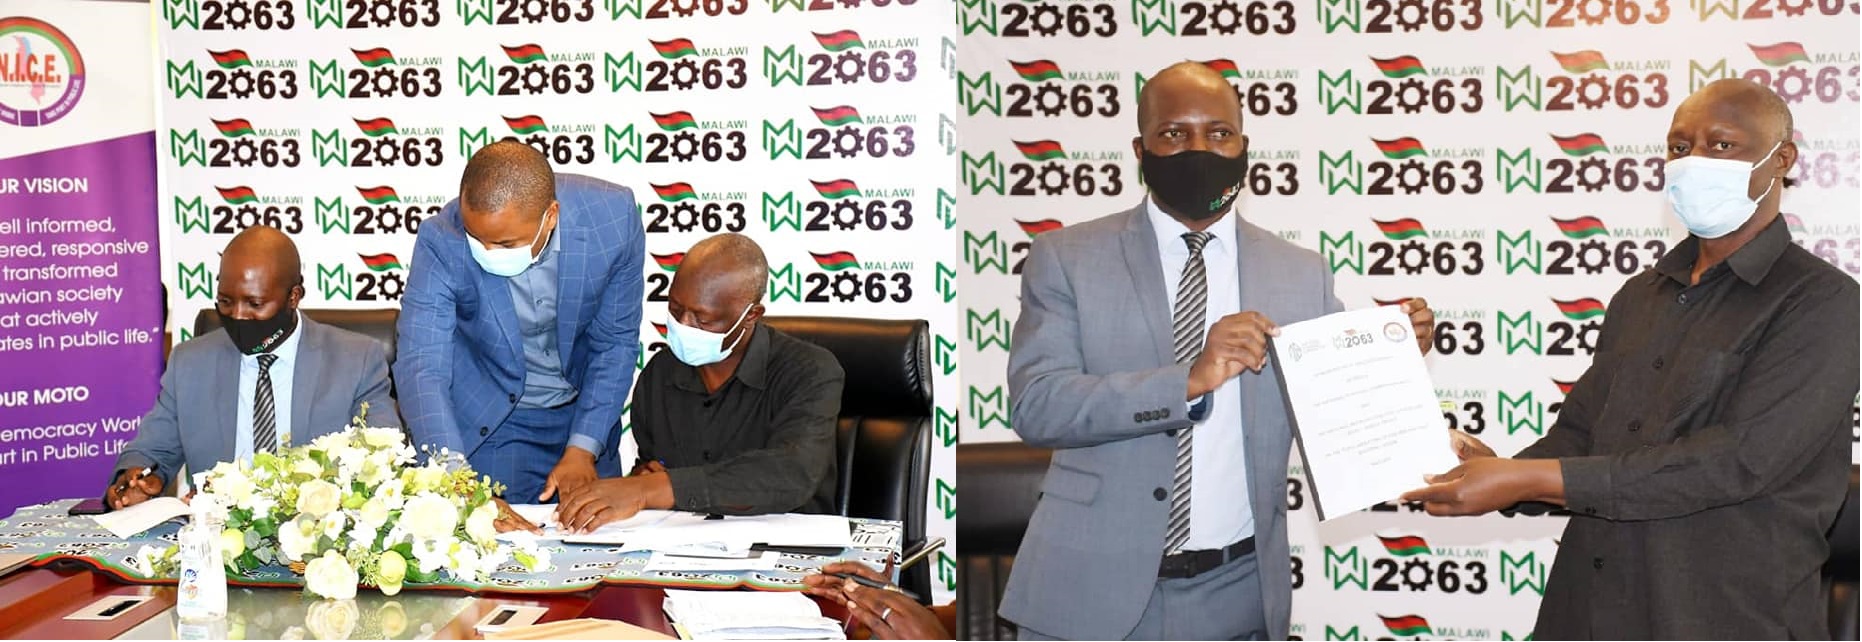 NPC signs MoU with NICE on MW2063 popularization